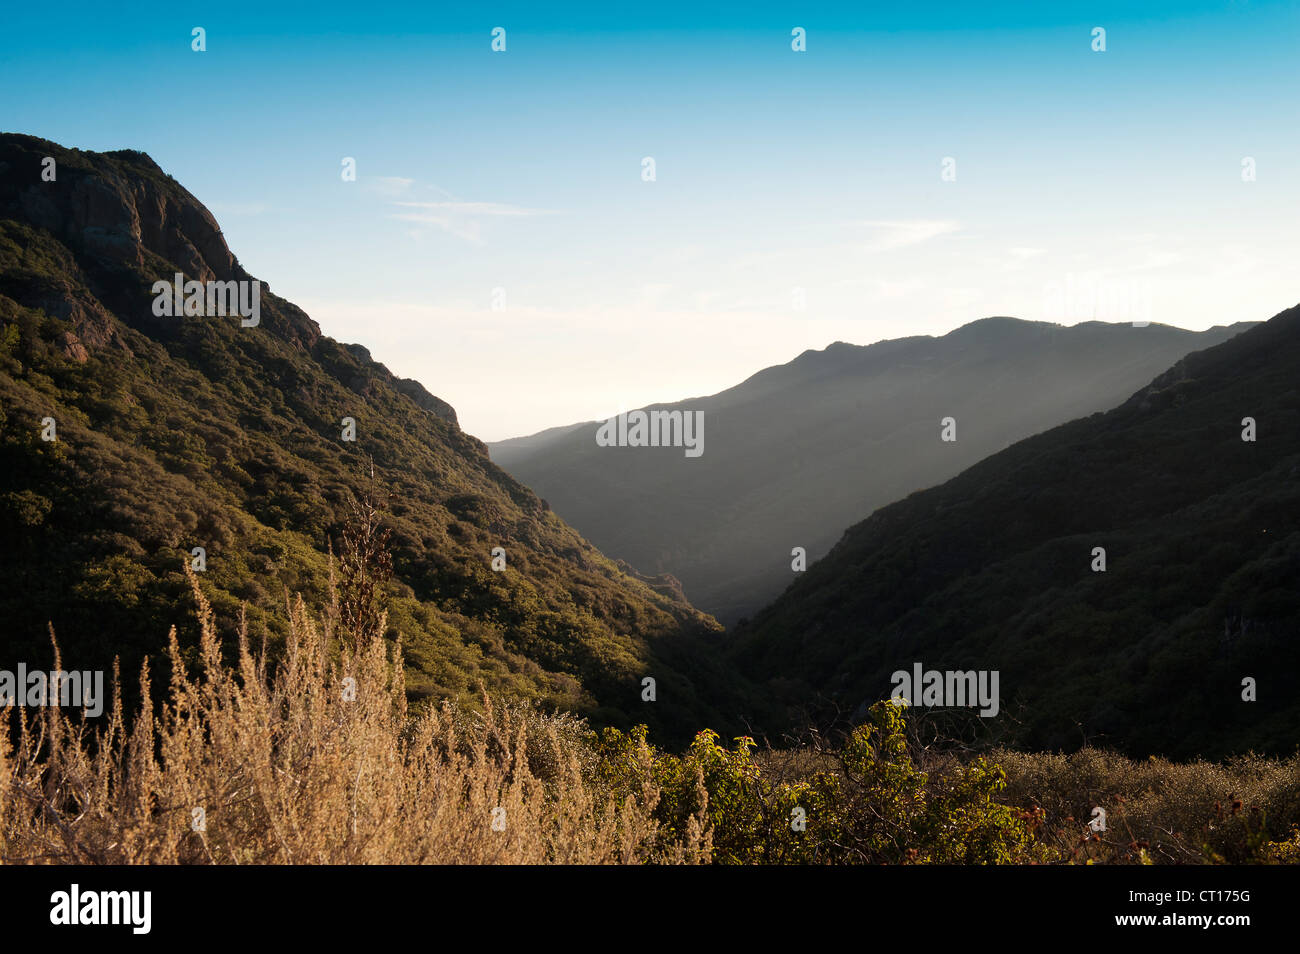 Plants growing on hillsides in valley Stock Photo